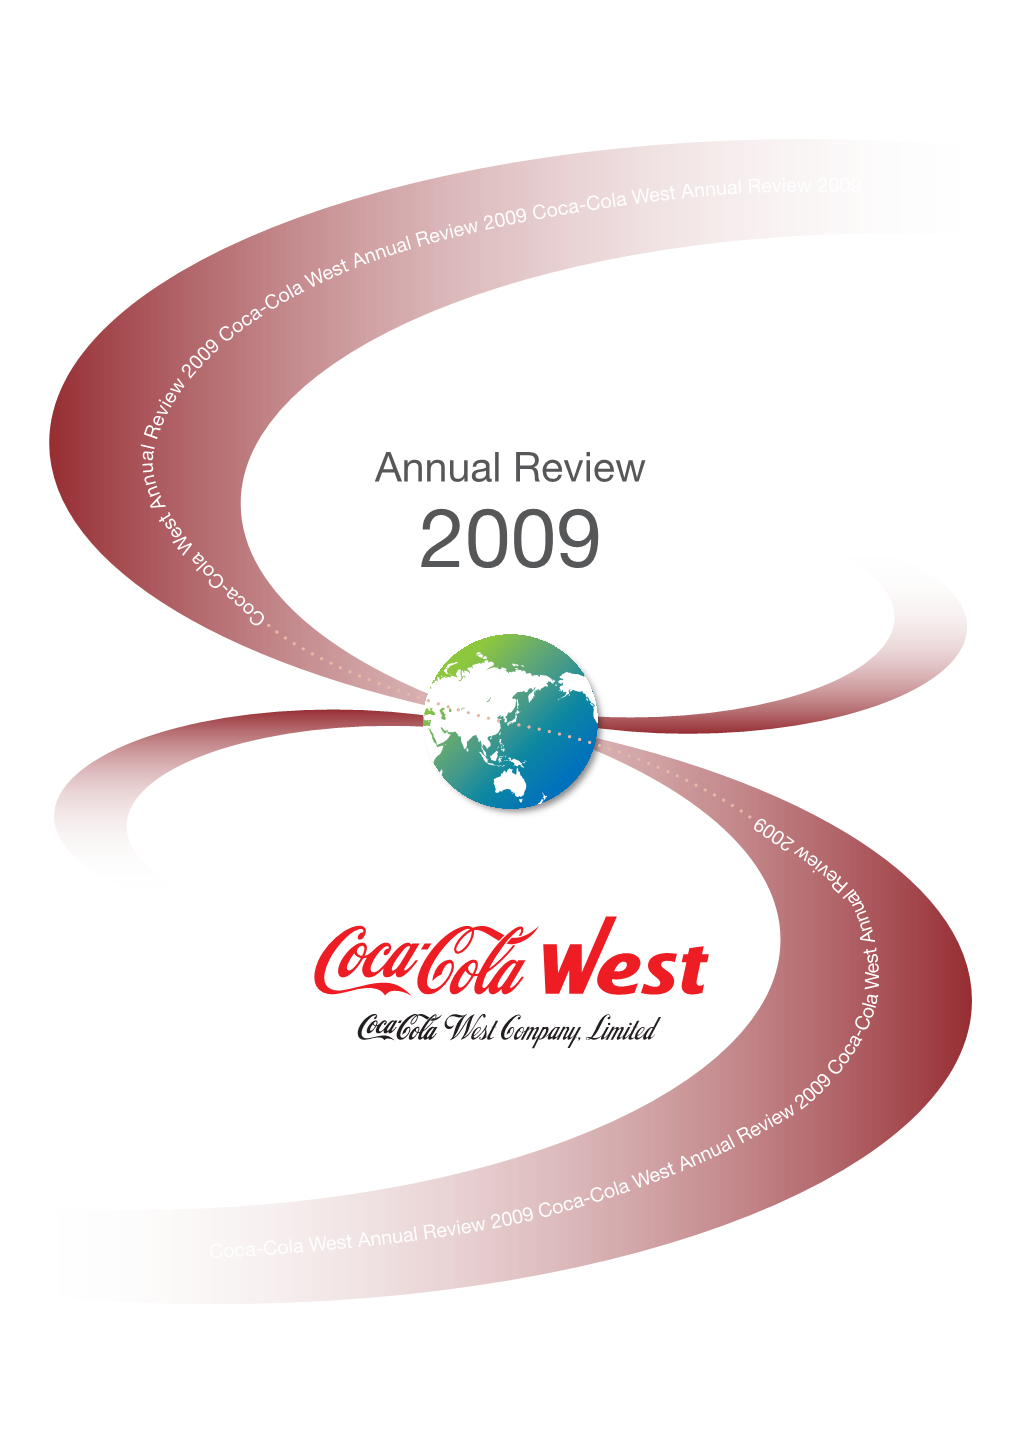 Coca-Cola West Company, Limited